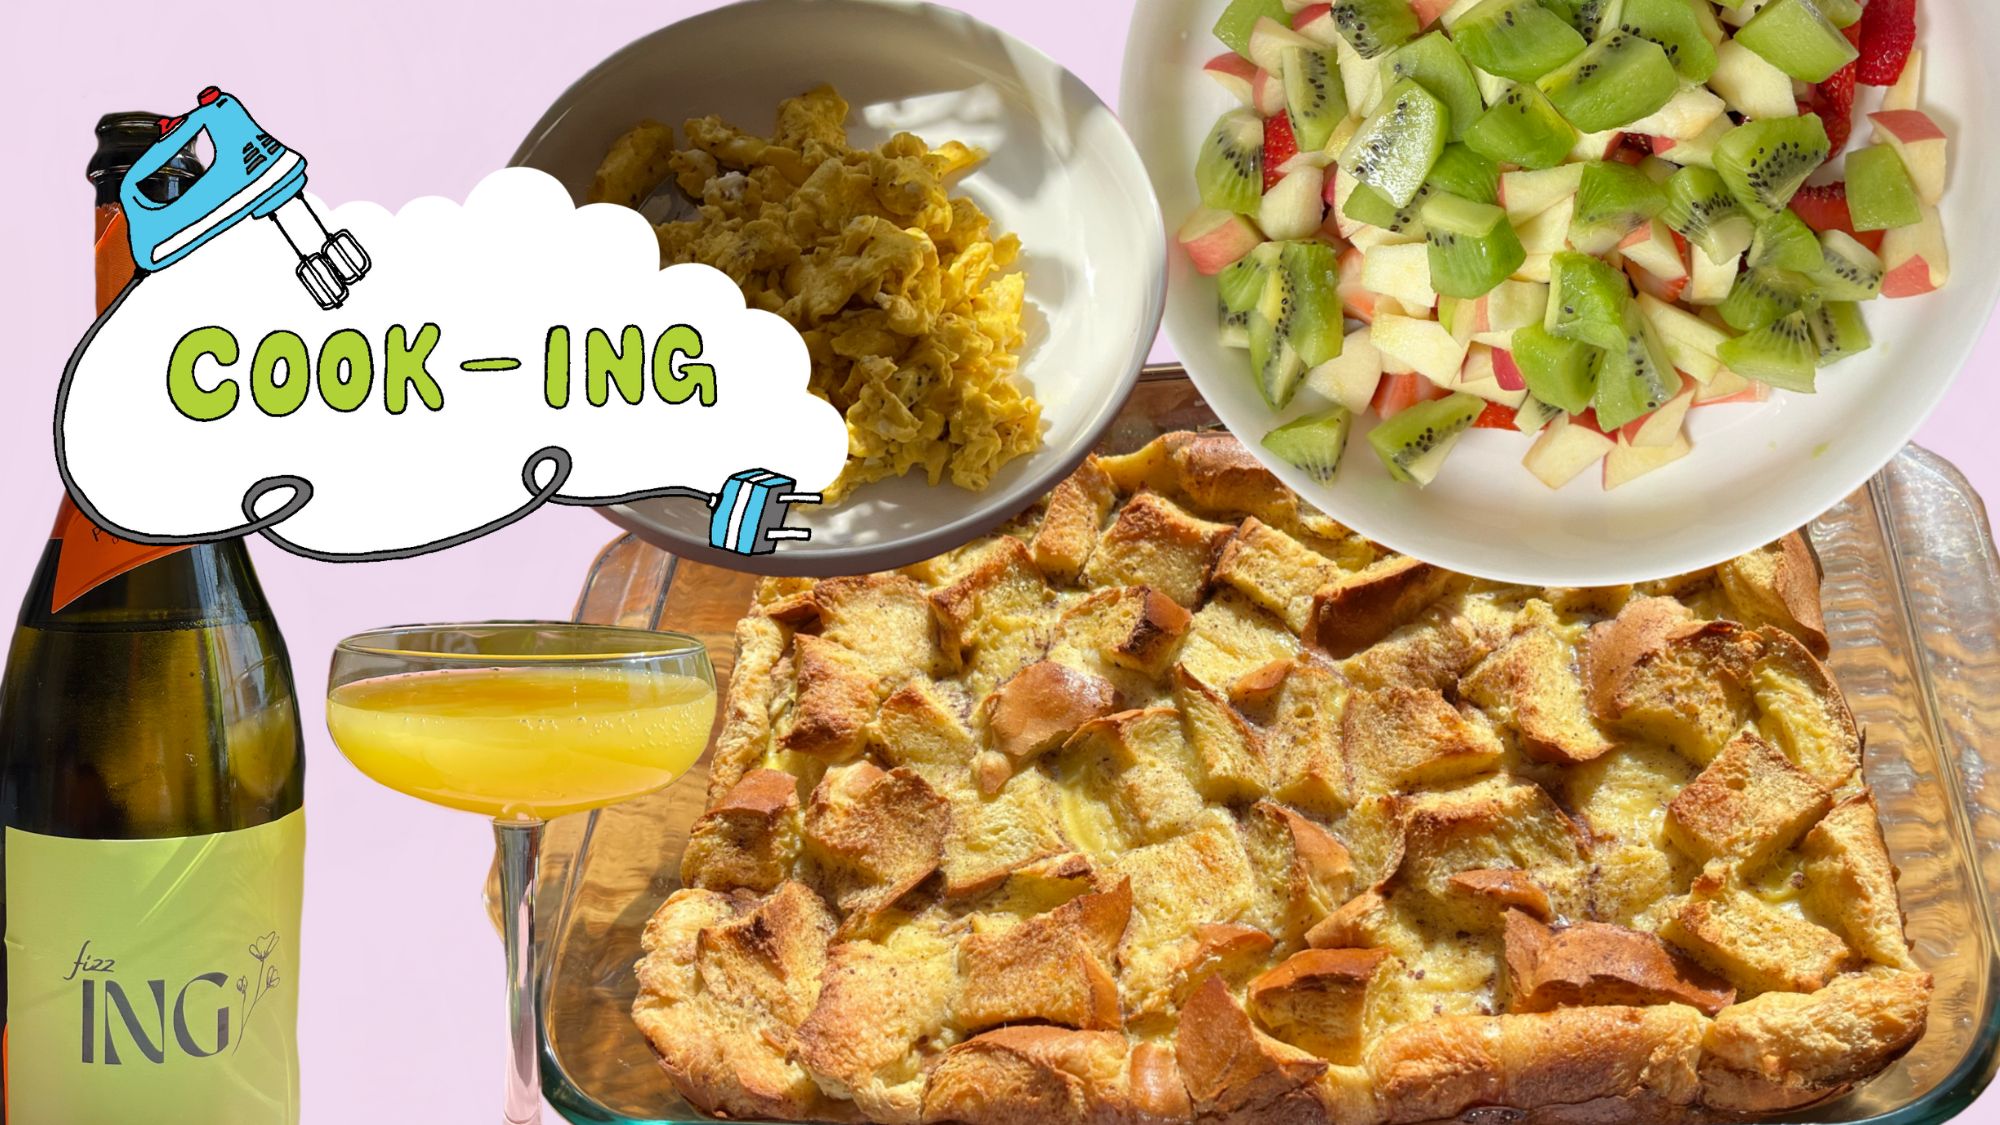 A collage of photos of bread pudding, scrambled eggs, fruit salad, and a mimosa. A logo in the top left corner reads “Cook-ING” with a blue hand-mixer.